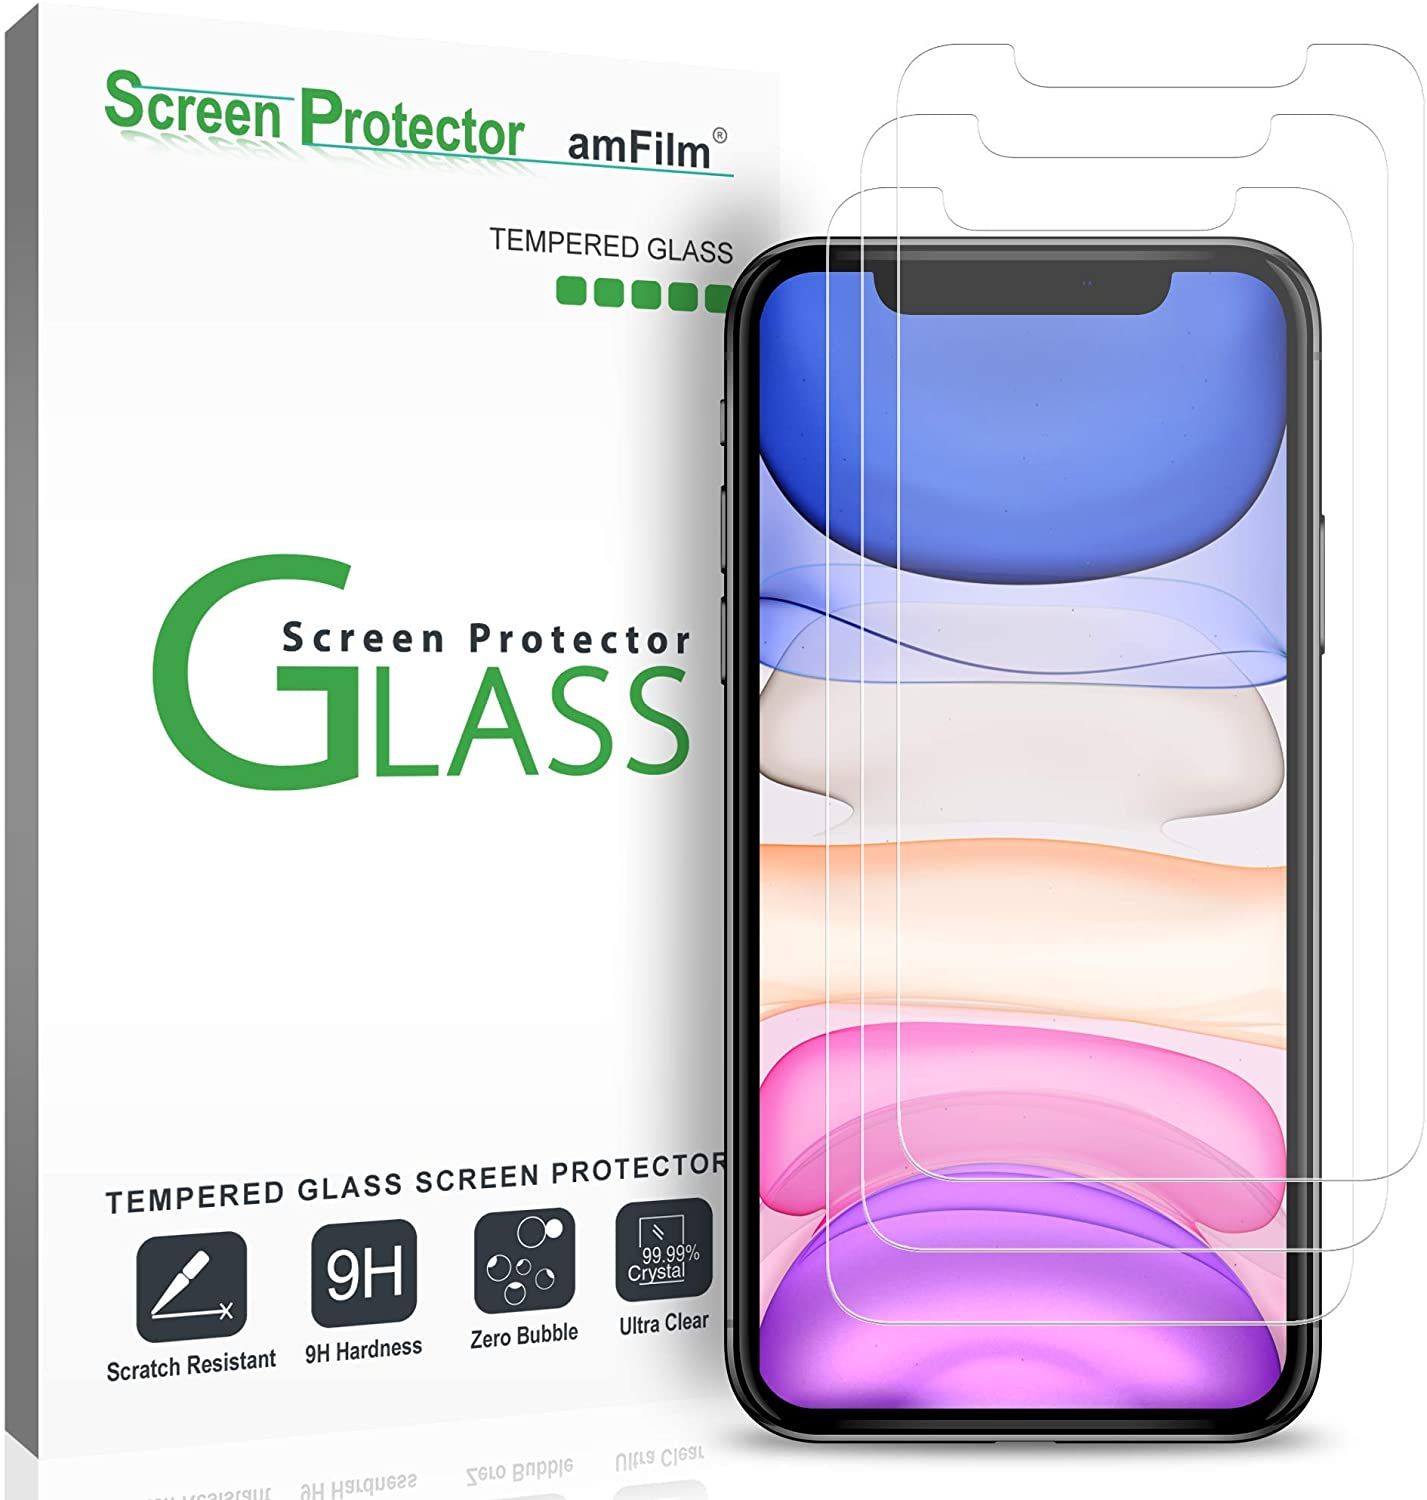 Scratch-Resistant high Adhesiveness Vikuiti 2 x CV8 Screen Protector for Samsung WB5500 Ultra Clear 100% fits